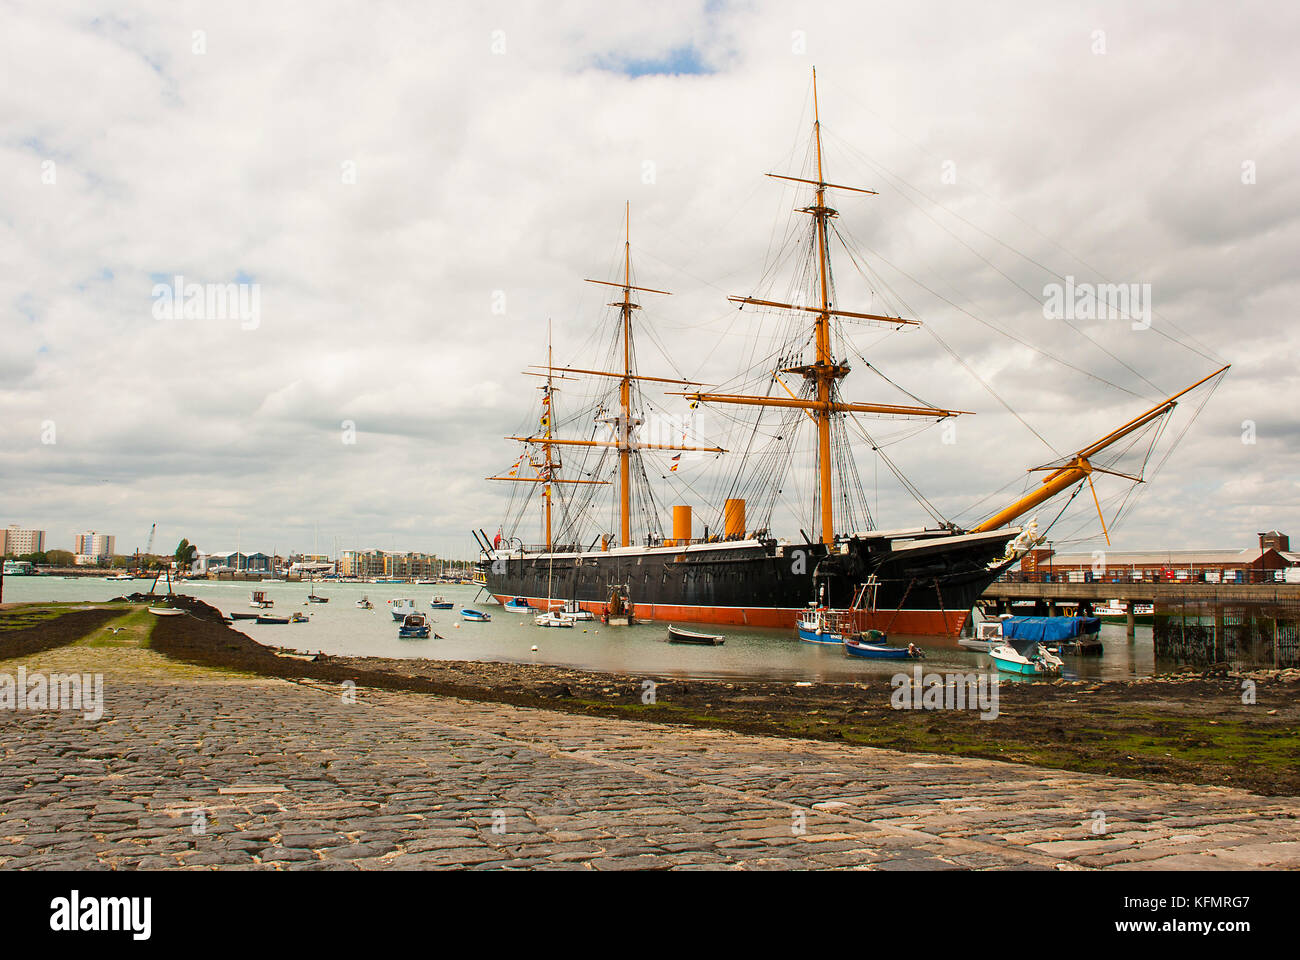 The old Royal Navy frigate HMS Victorious the first iron clad warship in the British Navy and now a floating museum lies at her berth in Portsmouth Stock Photo